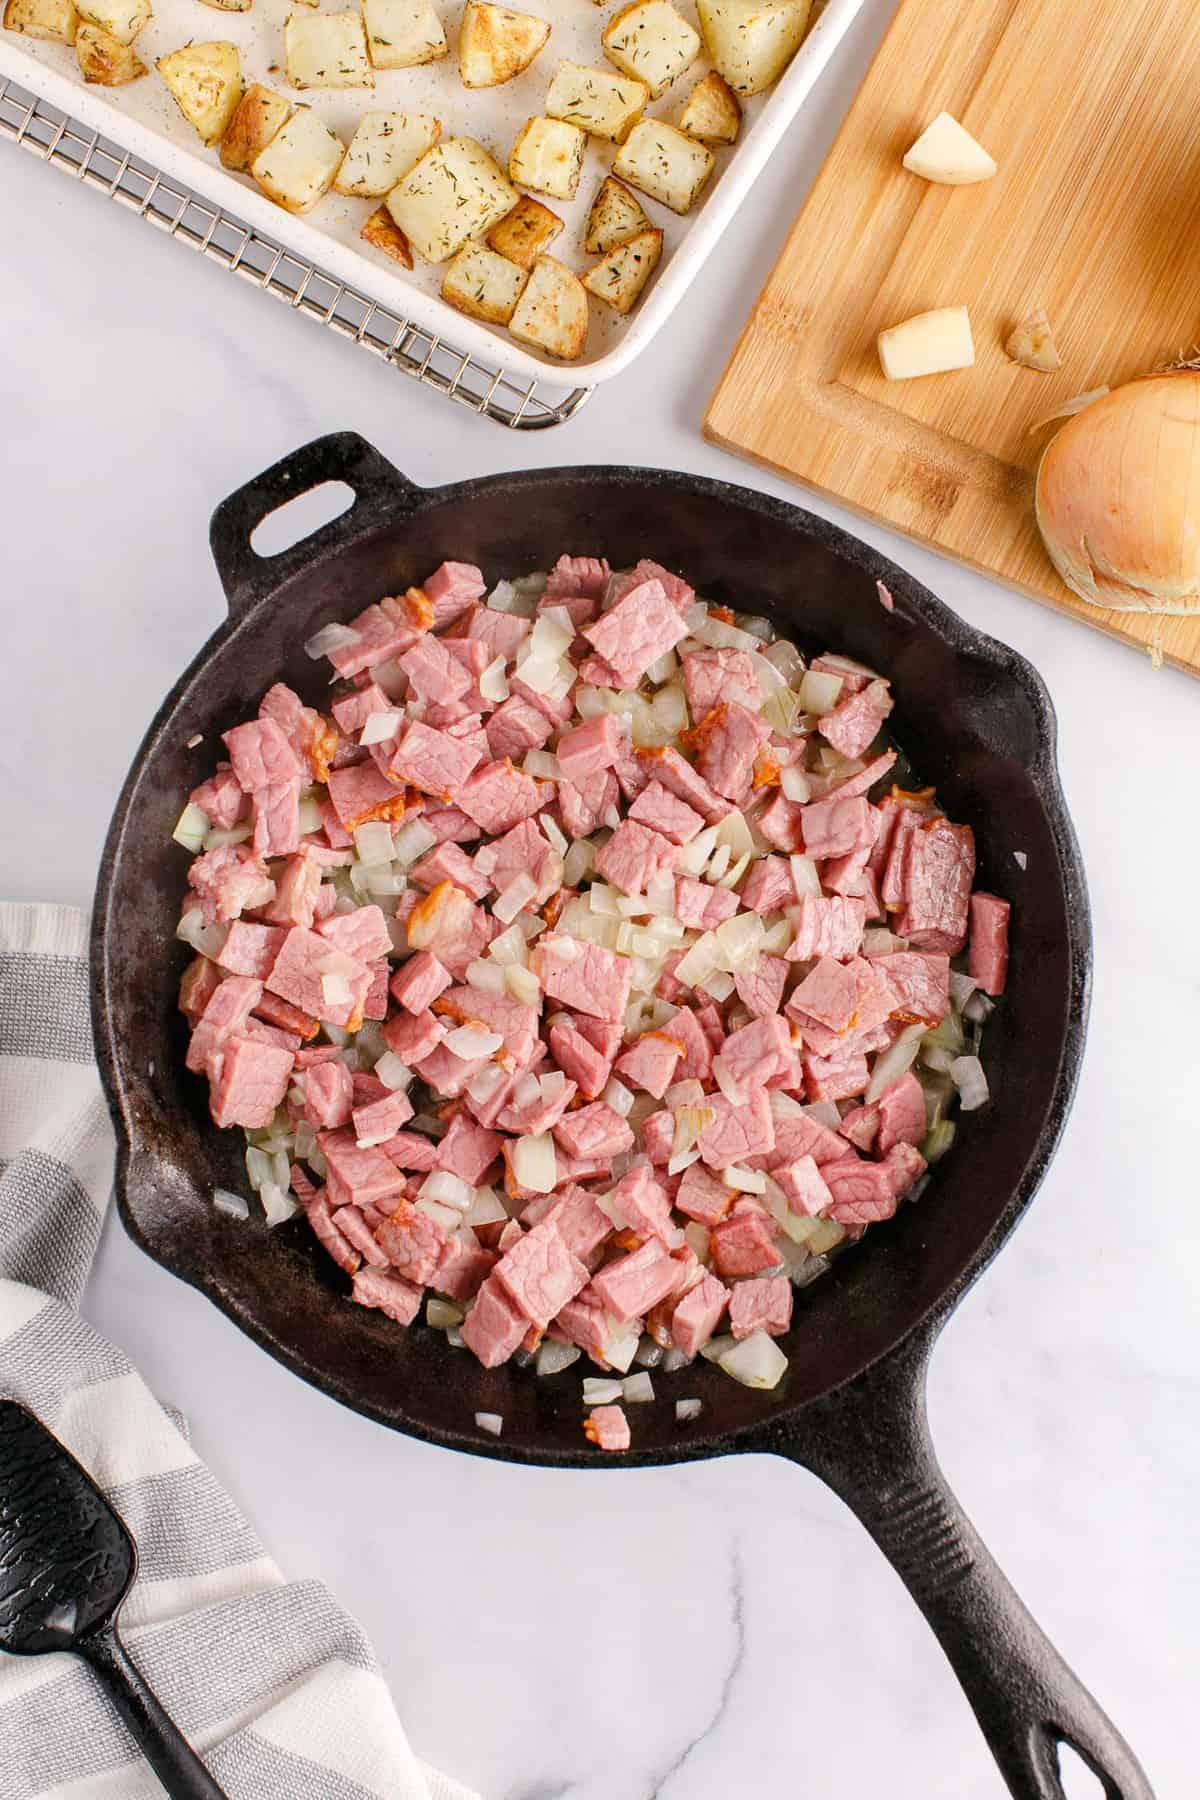 Corned beef and onions in a pan.